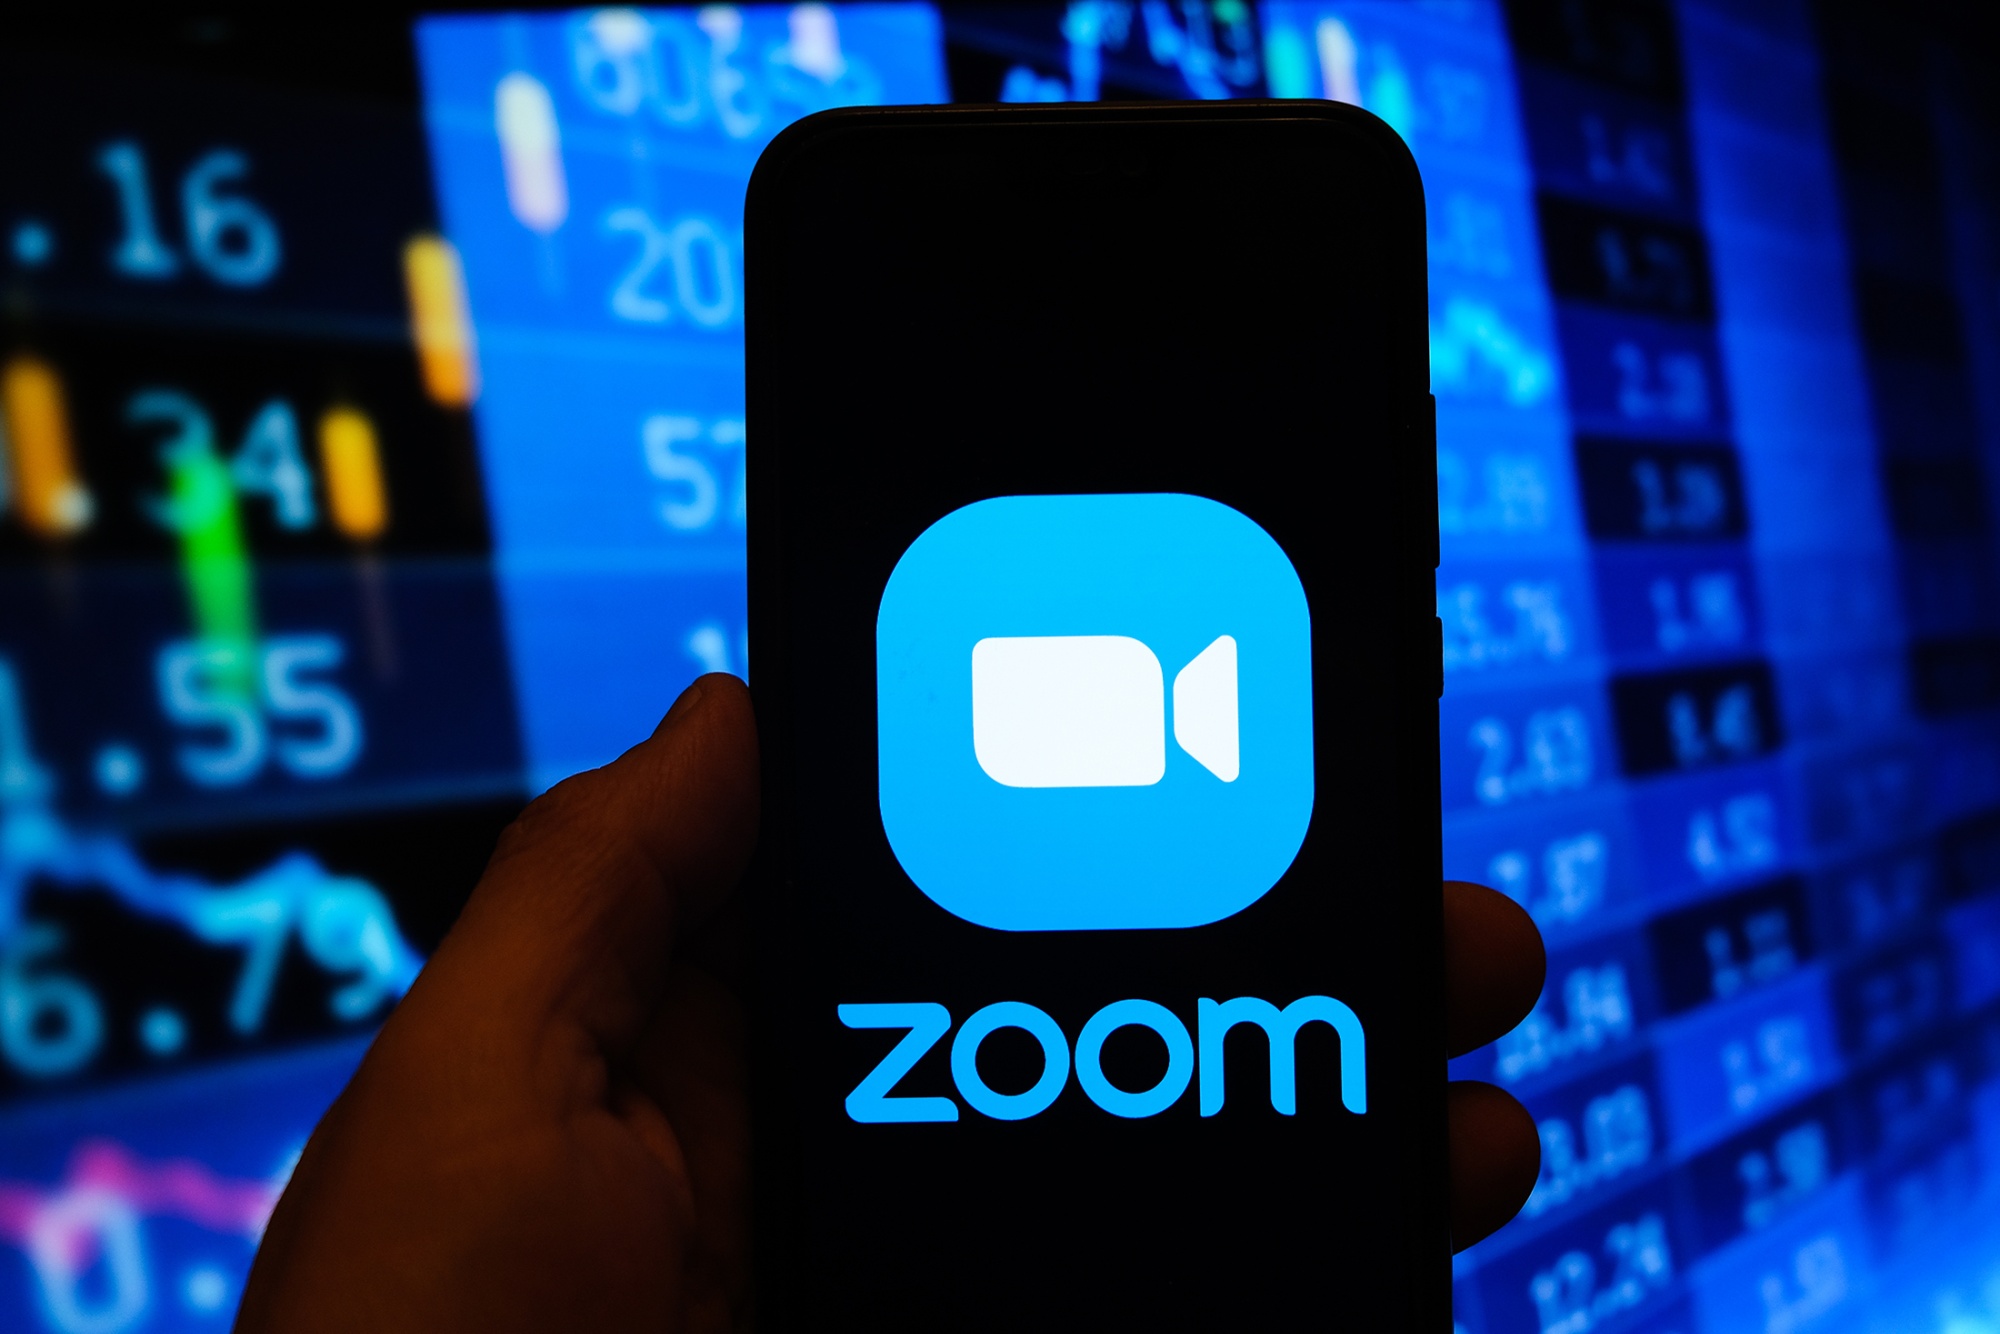 Zoom’s videoconference tools made it a pandemic darling. Now, it has bigger ambitions.